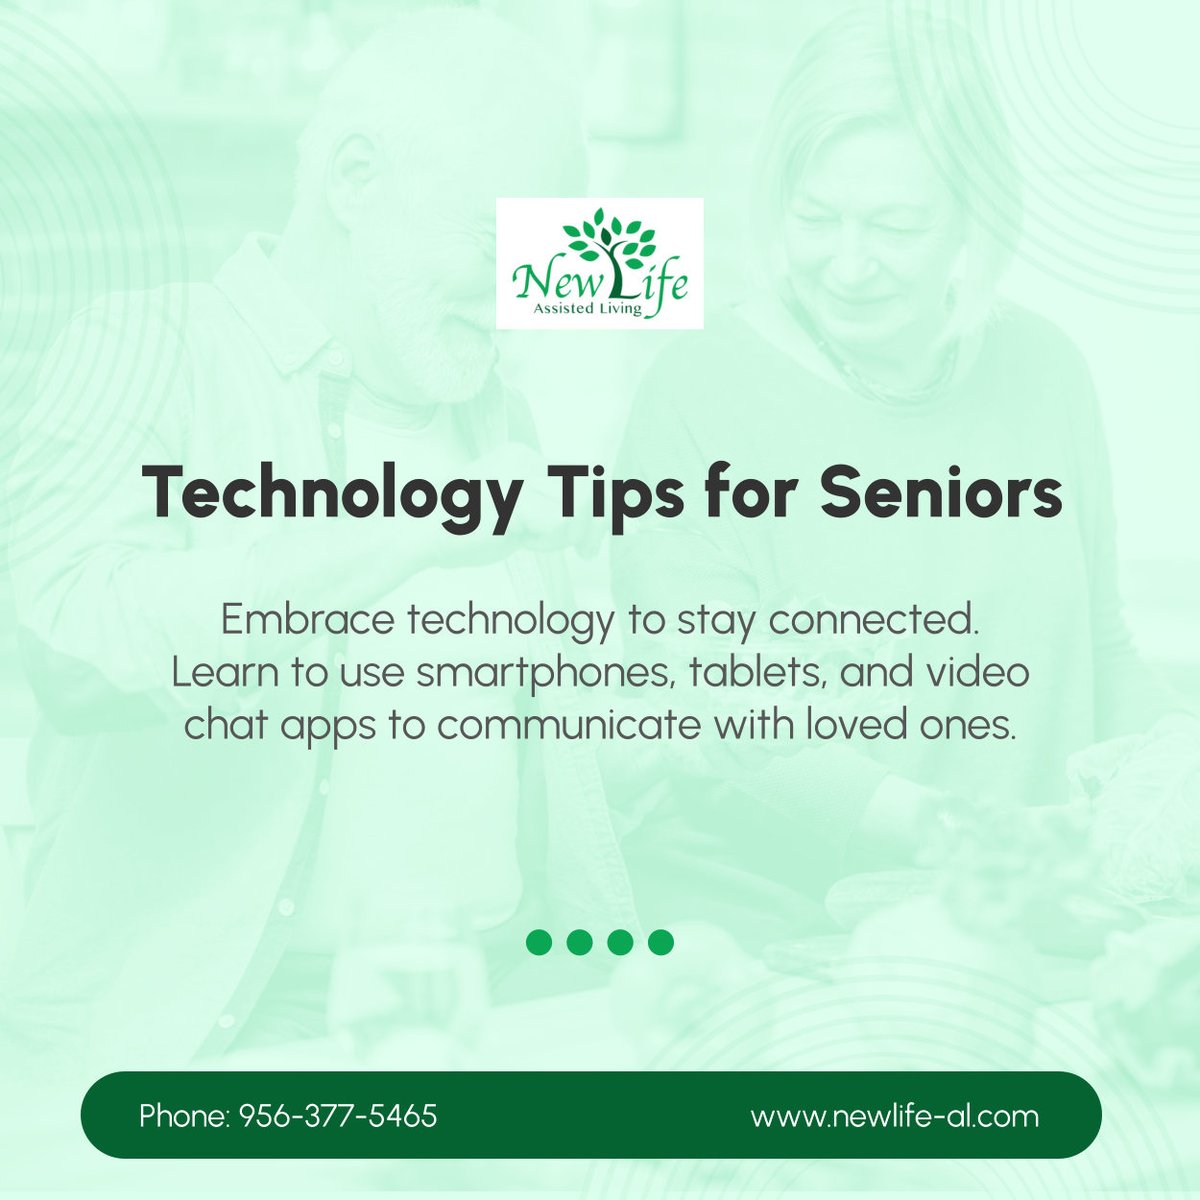 Stay in touch effortlessly! Unlock the power of technology and bridge the gap between you and your family and friends. 

#DonnaTX #AssistedLiving #TechSavvySeniors